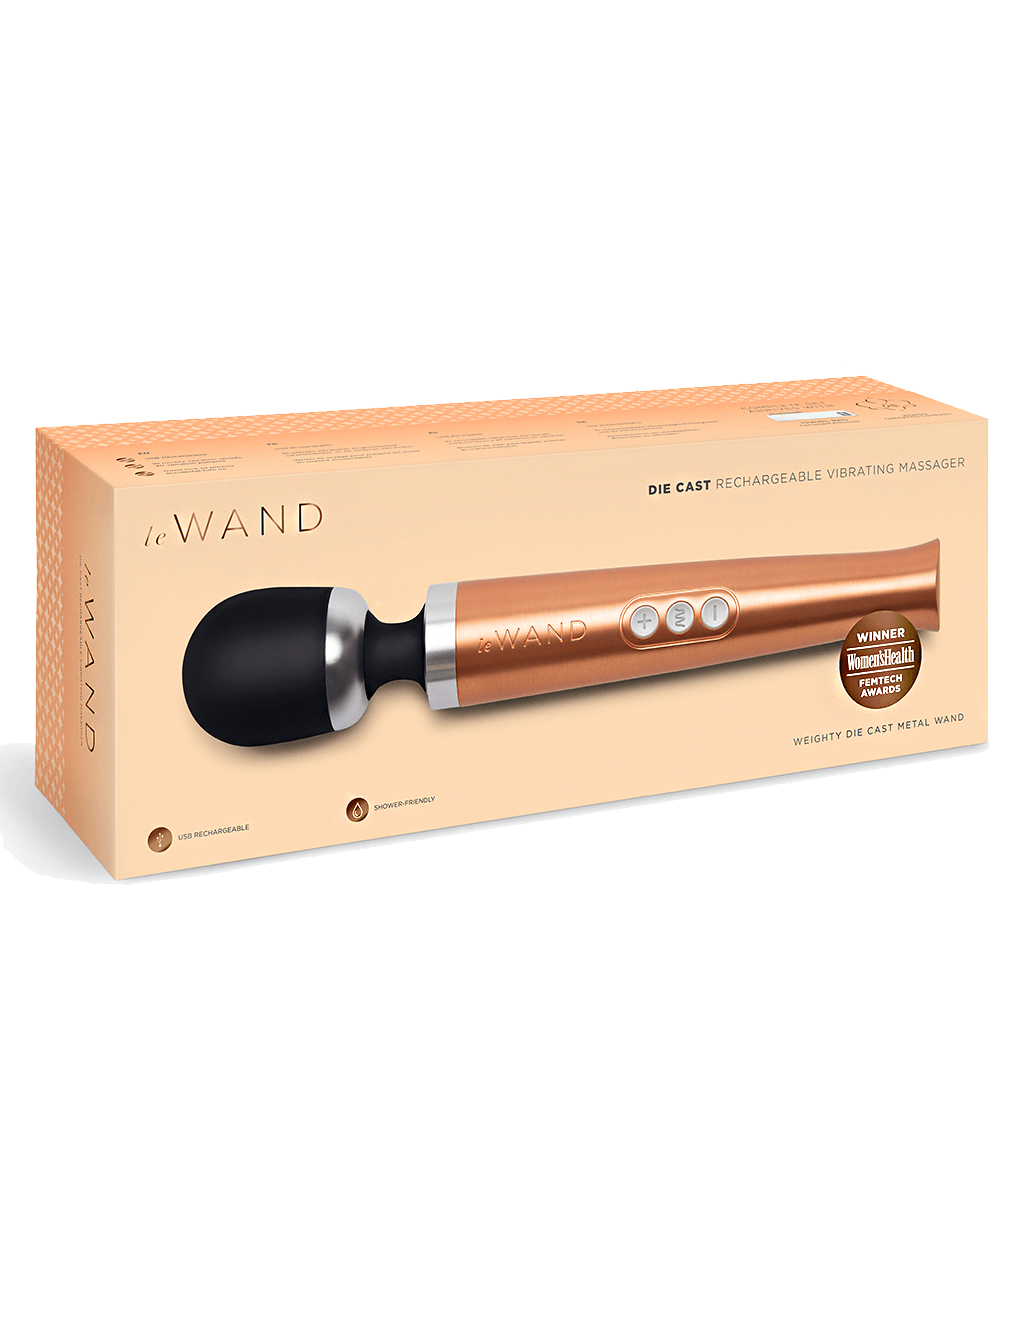 Le Wand Diecast Rechargeable Wand - Rose Gold - Box Front